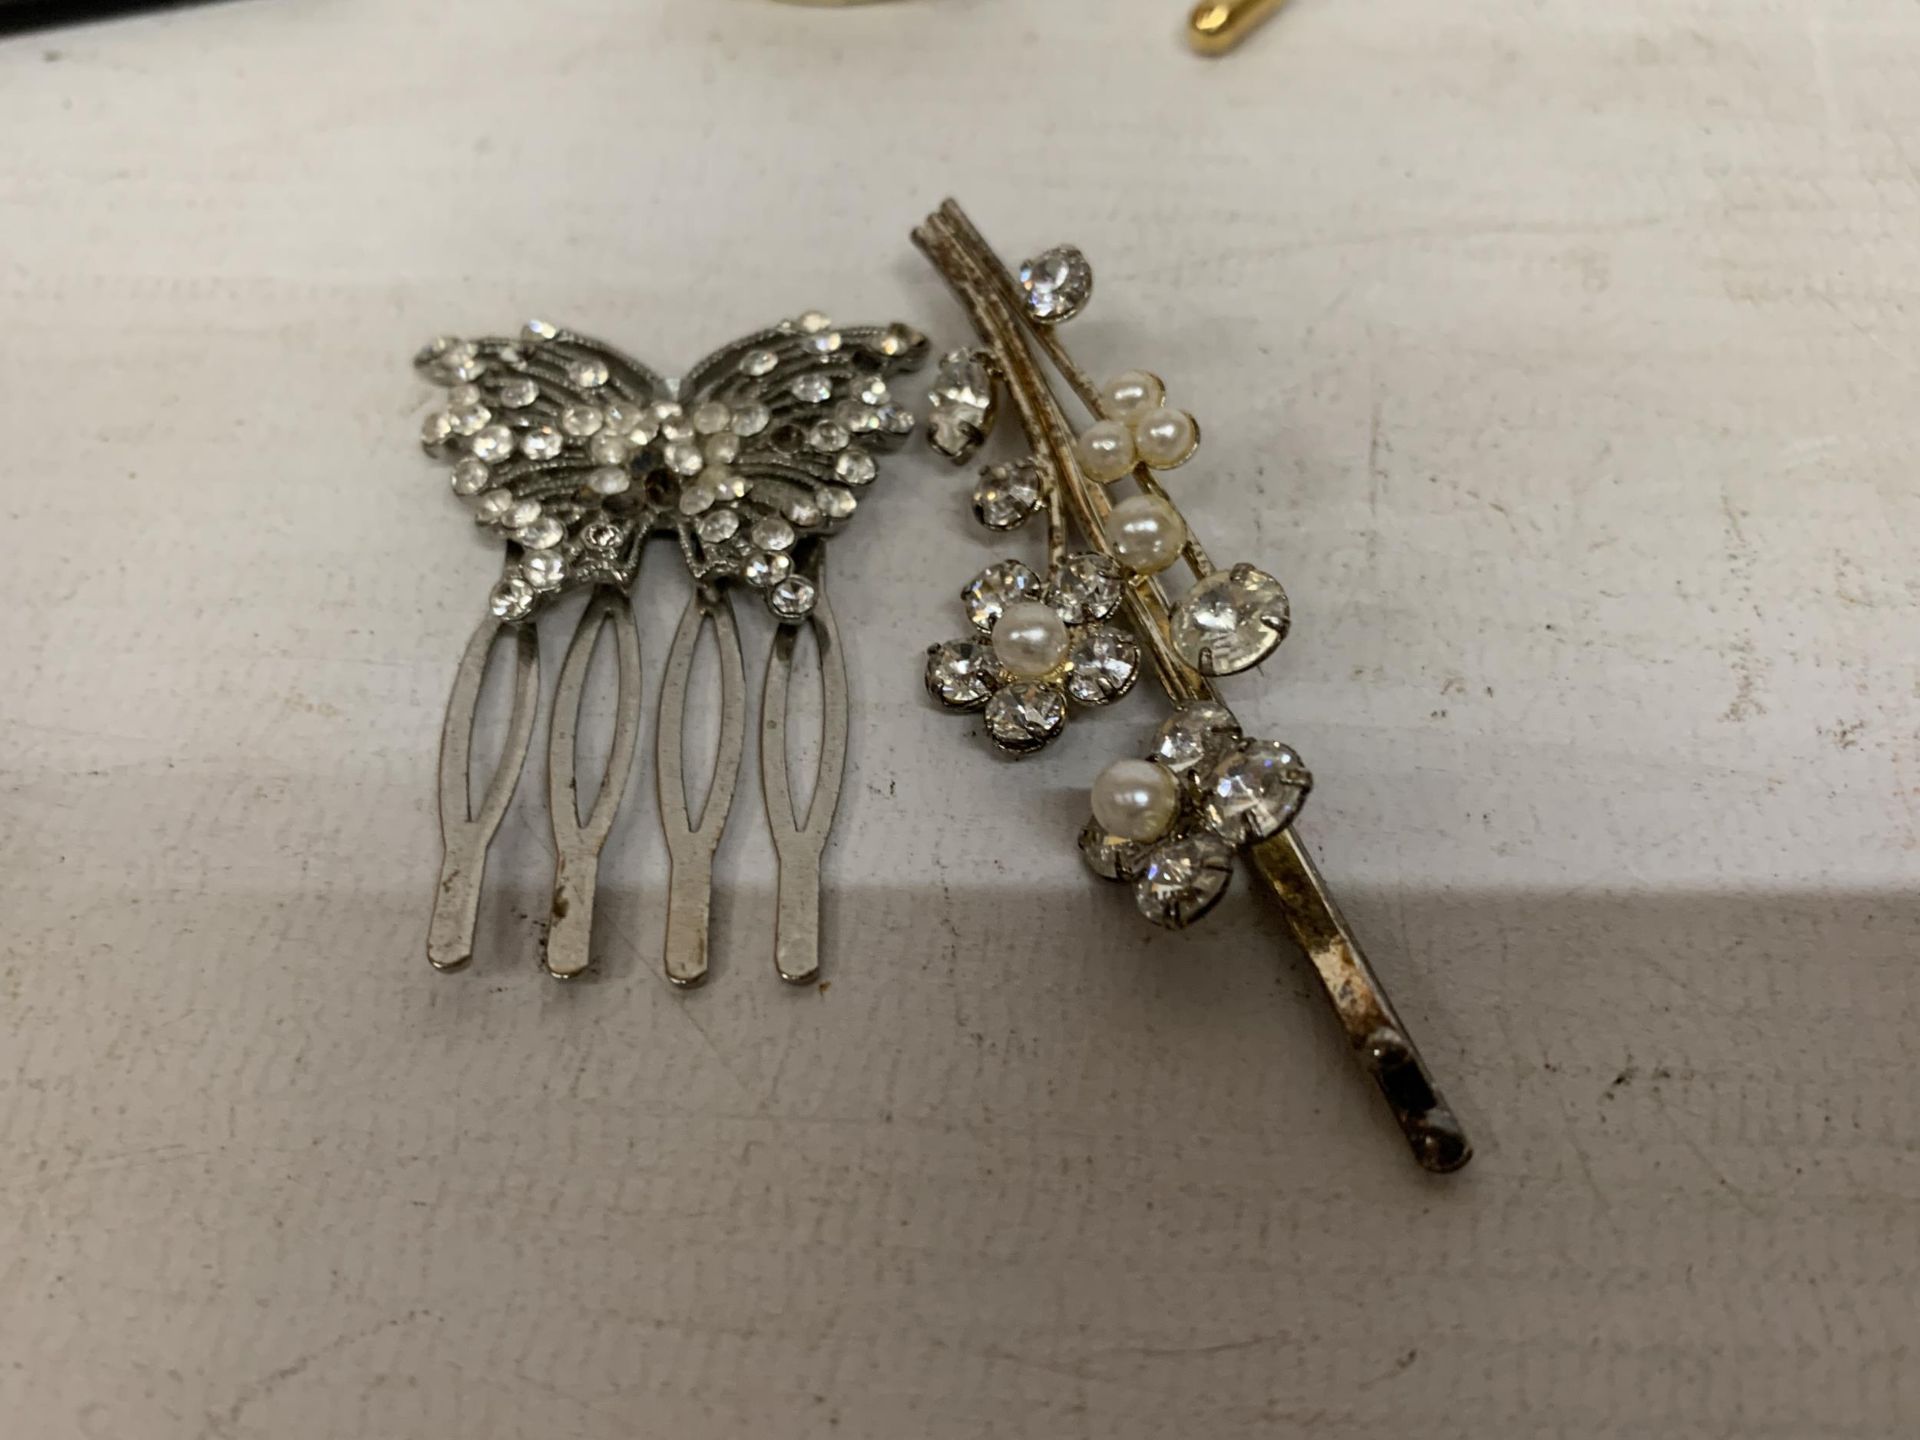 A QUANTITY OF VINTAGE BELT BUCKLES, HAIR SLIDES AND HAT PINS - Image 4 of 4